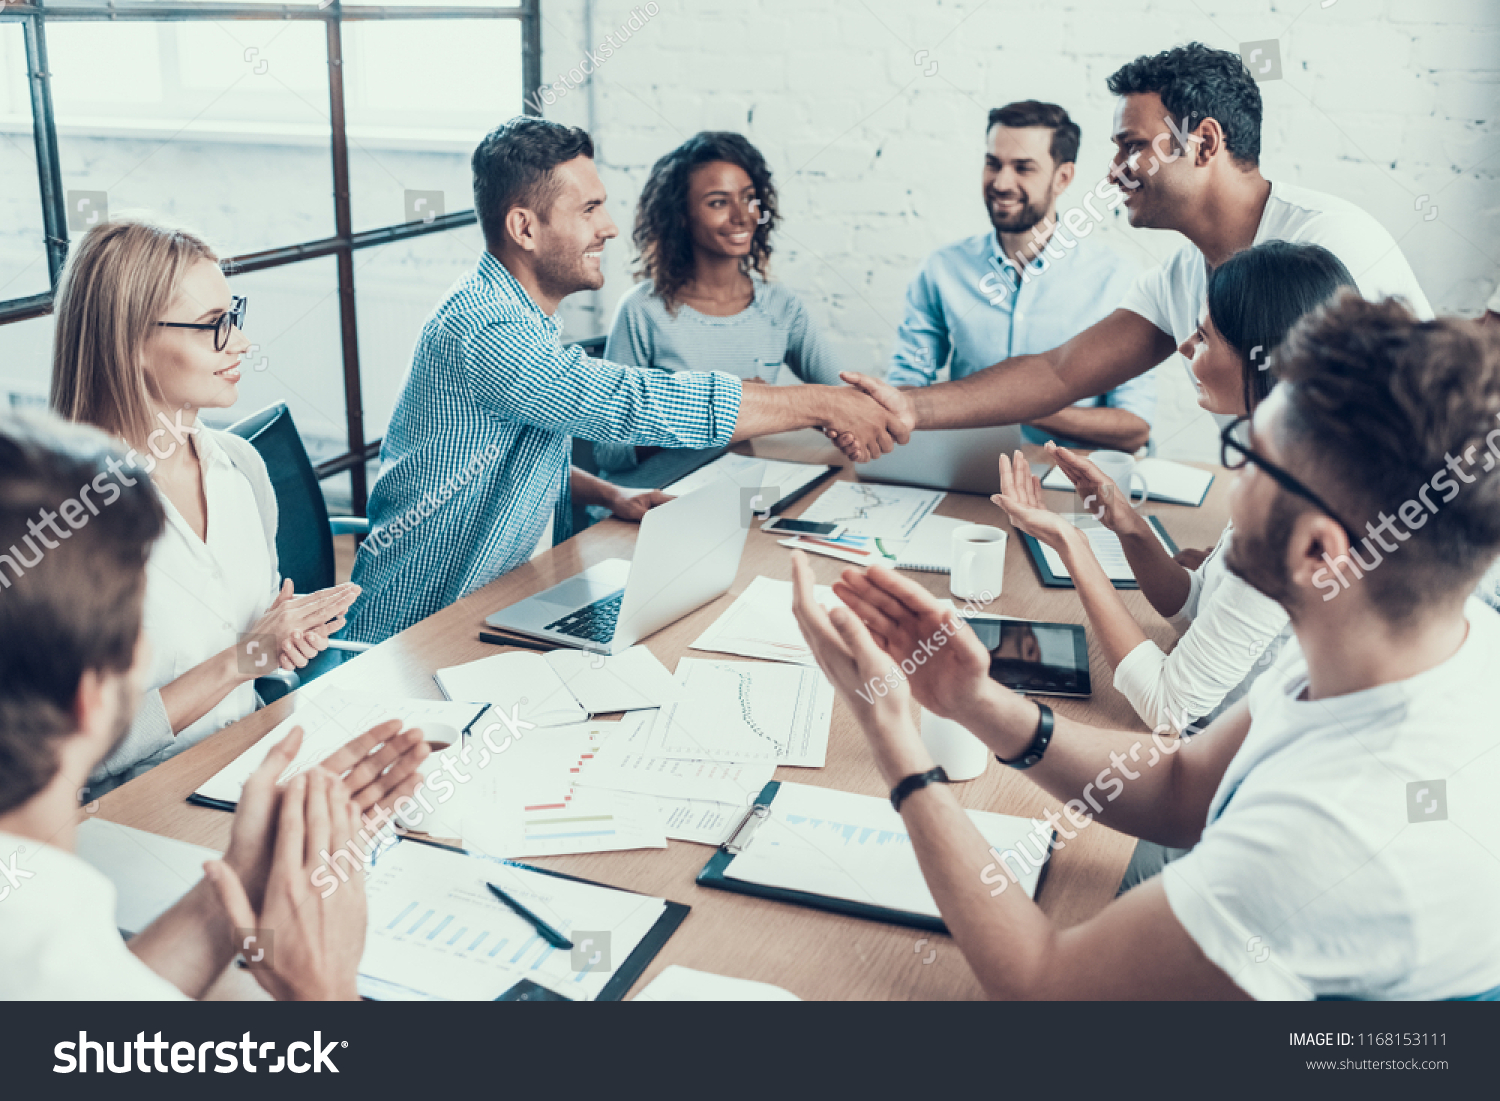 Successful Business Team Congratulating Colleague. Group of Young Happy Collegues Celebrating in Modern Office. Creative Successful Team at Work. Teamwork Concept. Corporate Lifestyle #1168153111